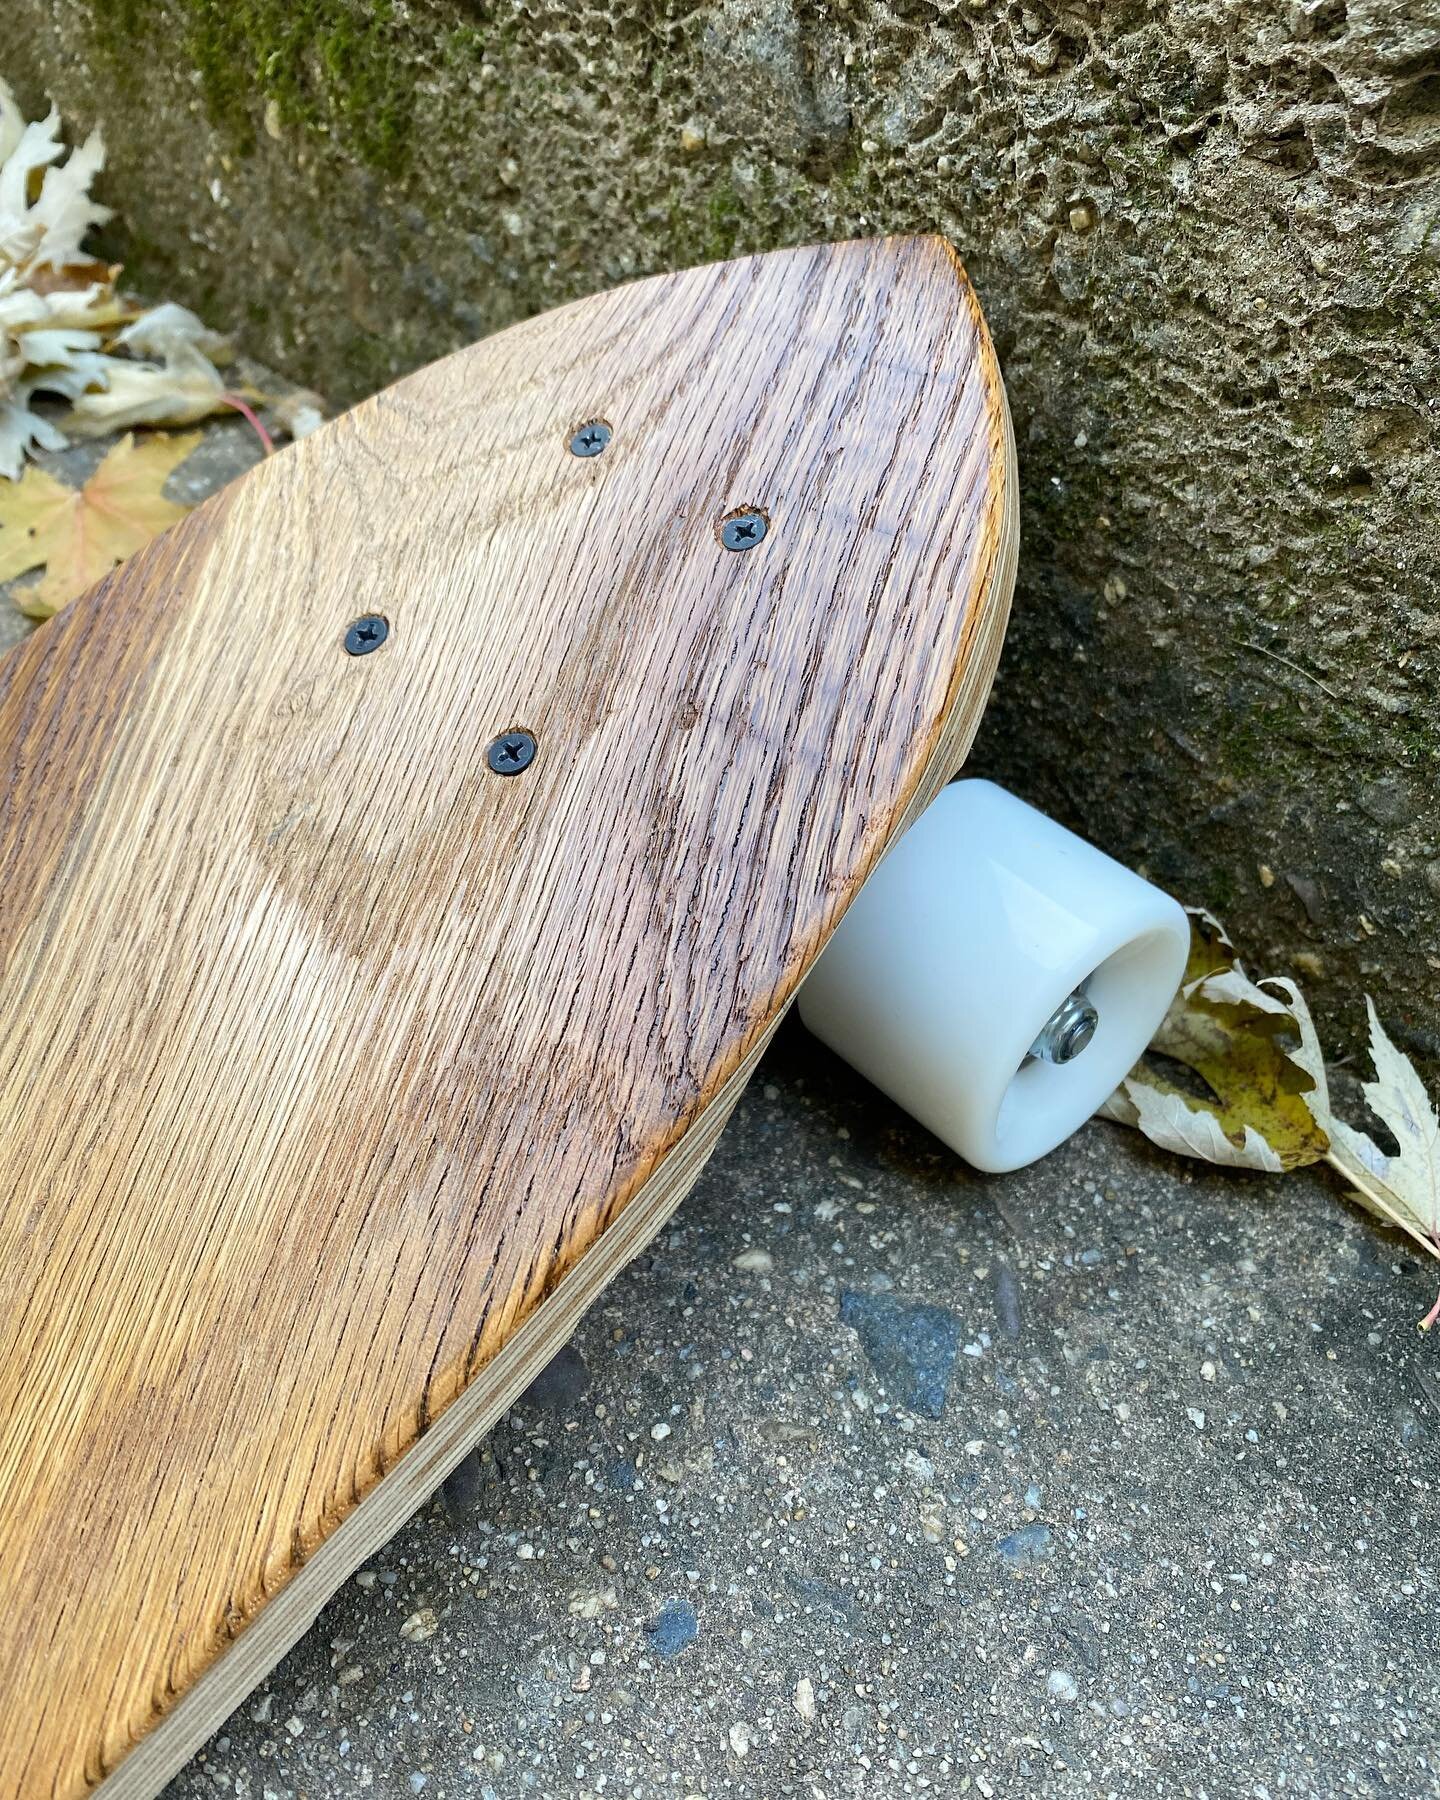 This reclaimed oak mini-cruiser is a nod to my past life in the wood flooring industry, which ultimately gave rise to Byrd. 

When I moved back to the Philly area in 2017, it was to manage a wood flooring business with my family. Being surrounded by 